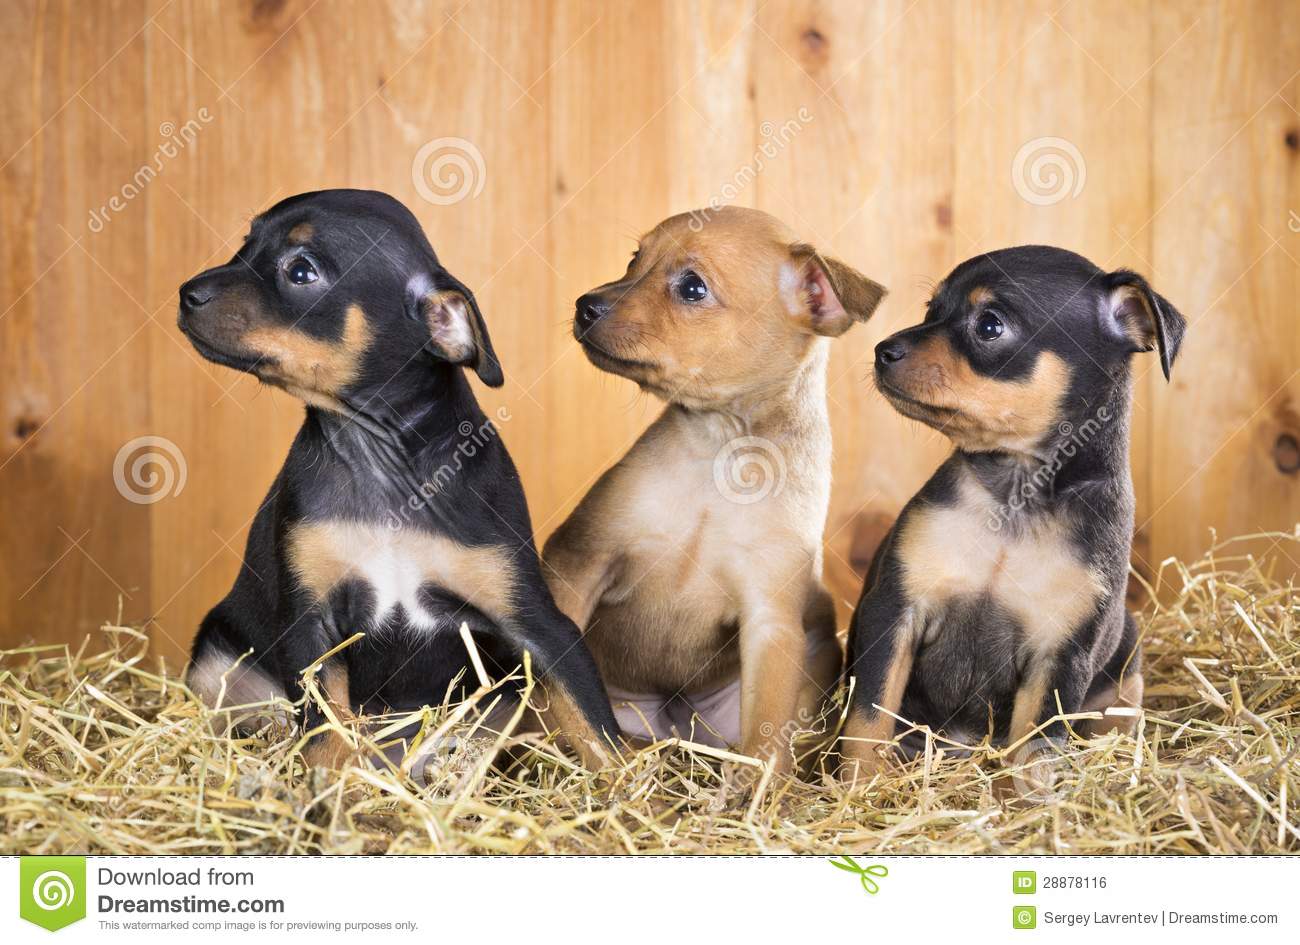 Russian Toy Puppies: Russian Royalty Free Stock Three Russian Toy Terrier Puppies Breed